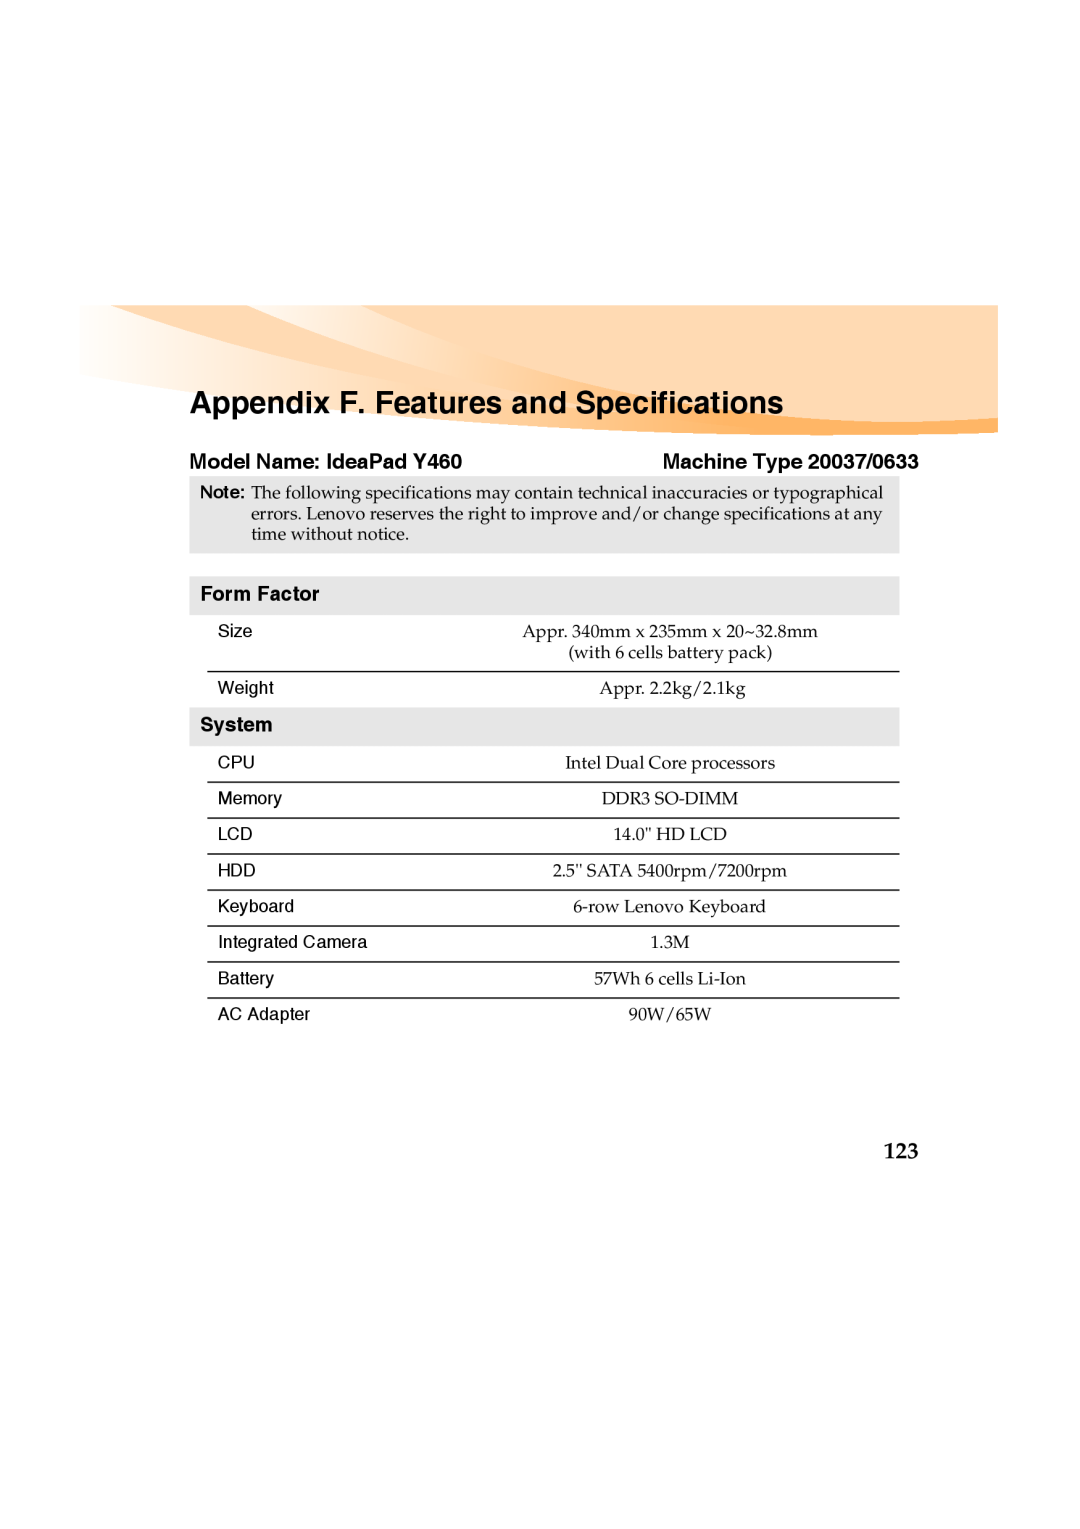 Lenovo Appendix F. Features and Specifications, Model Name IdeaPad Y460, Form Factor, System, Machine Type 20037/0633 